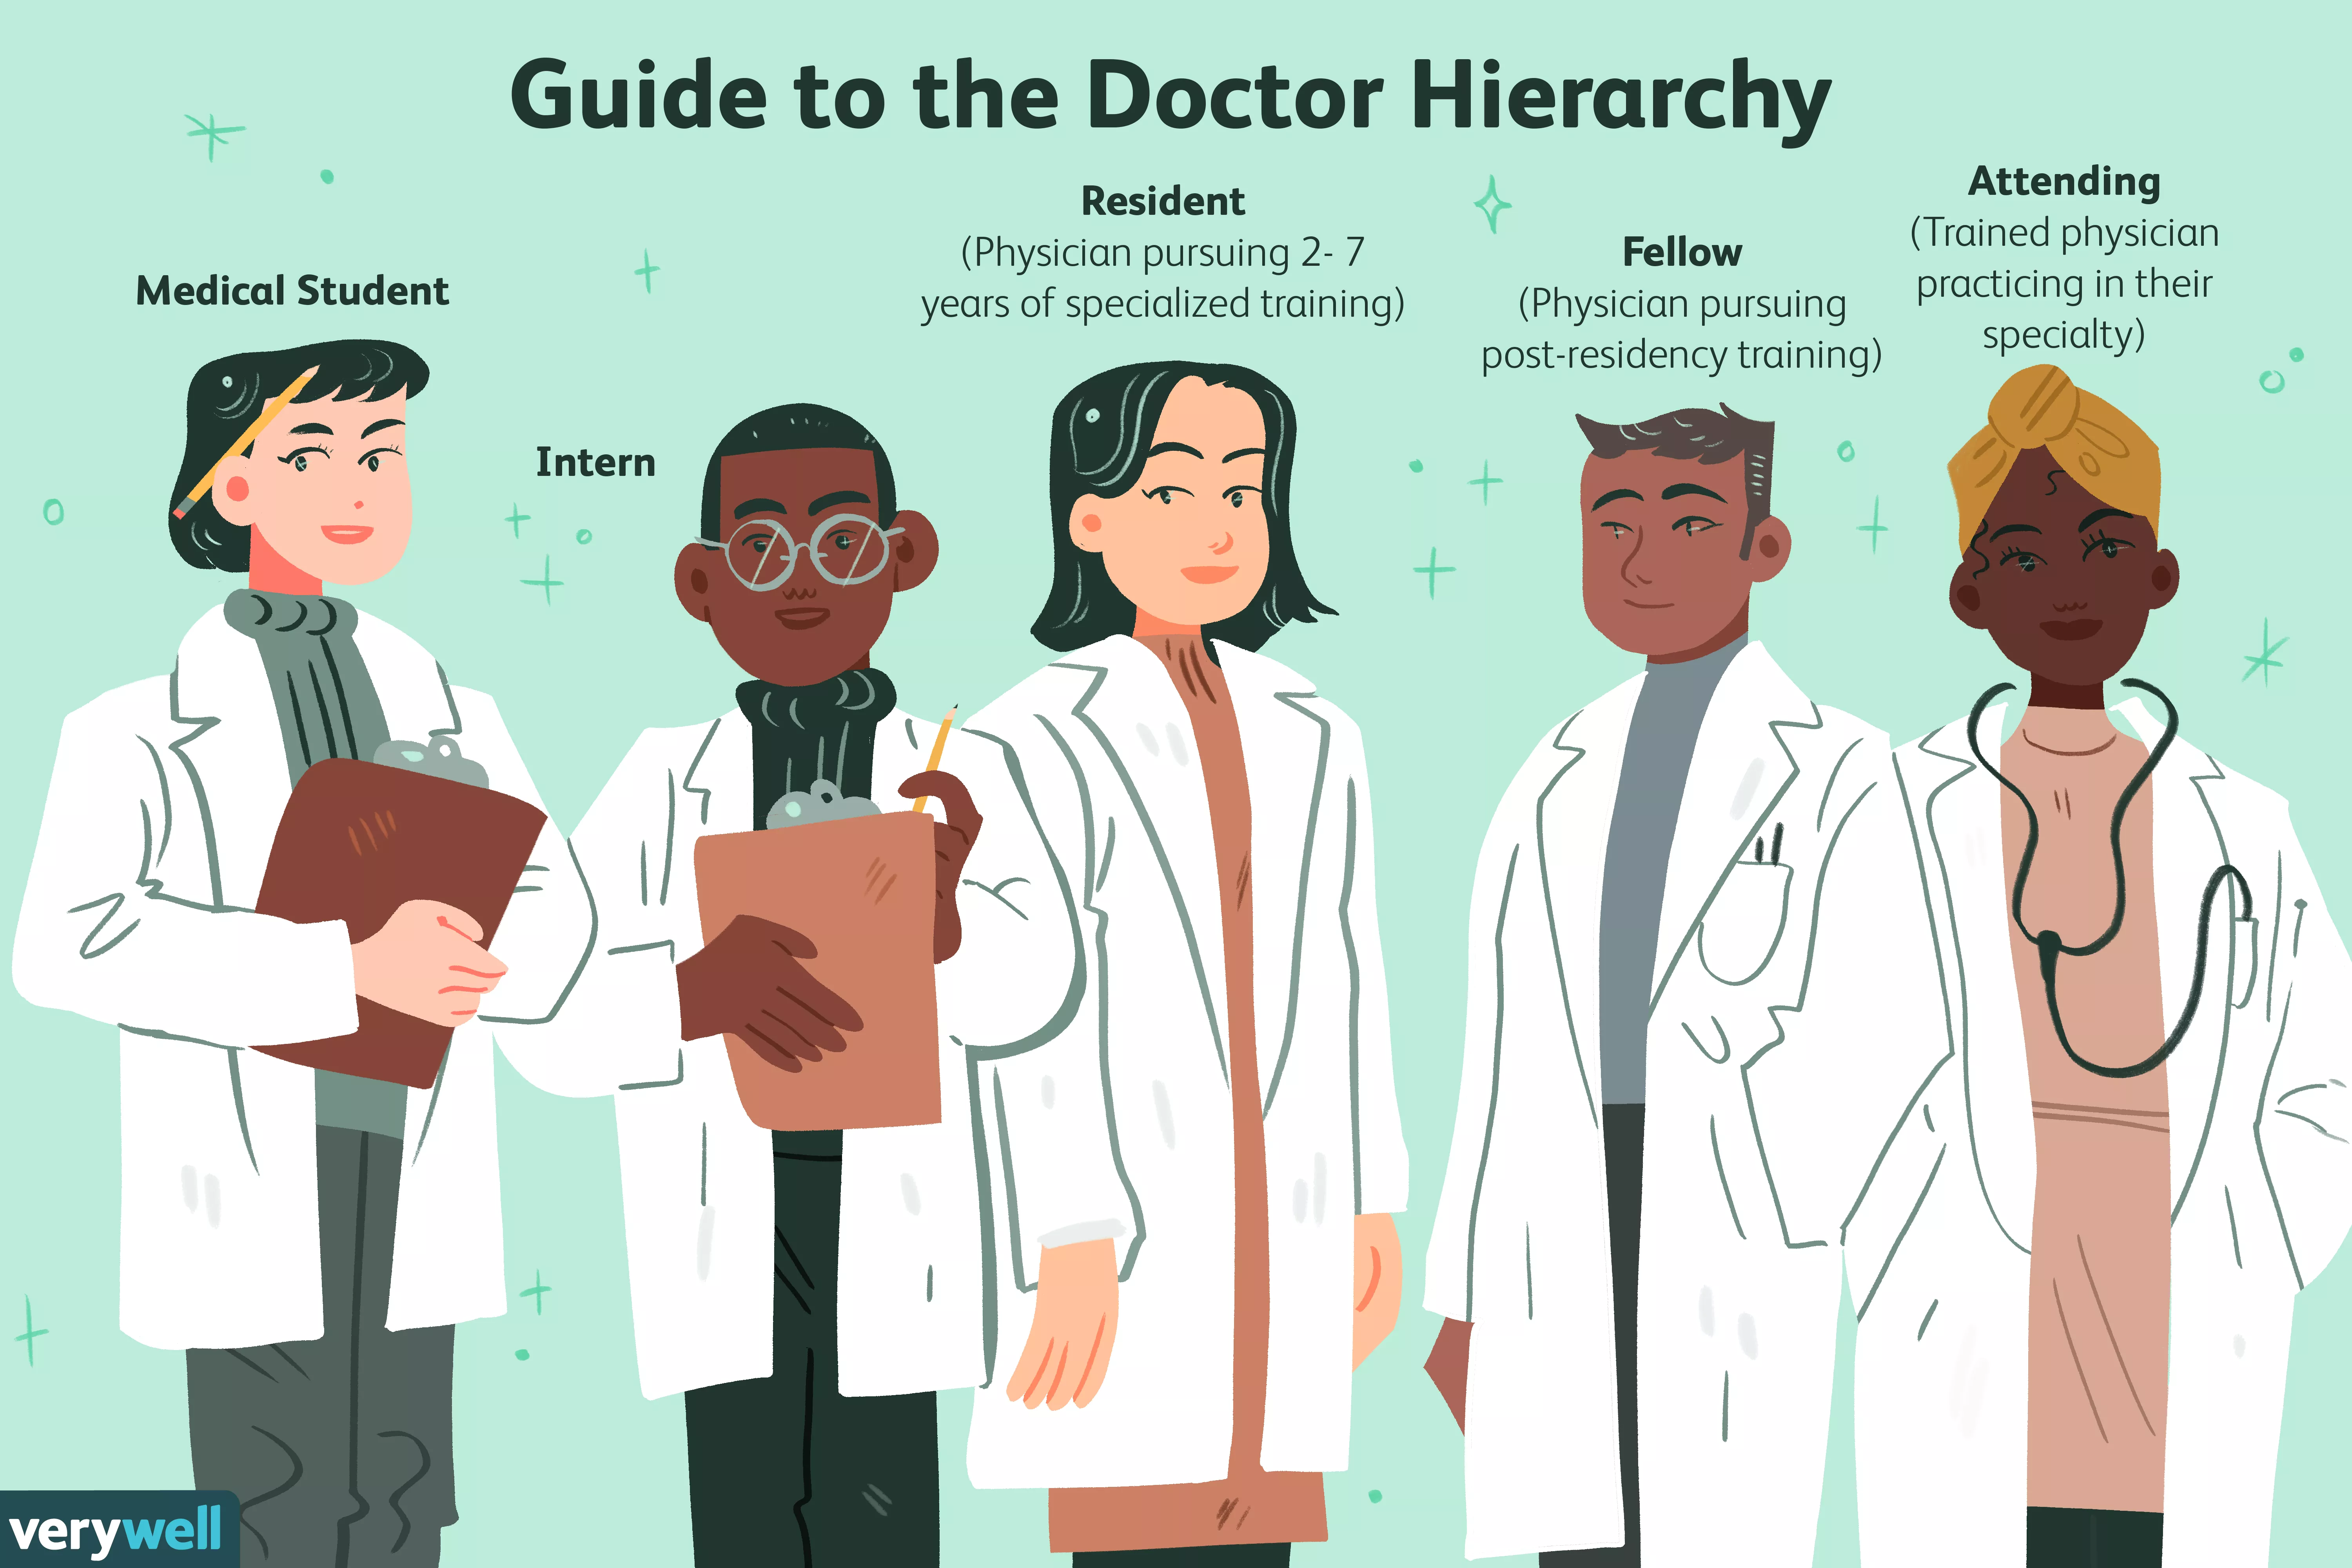 Guide to the Doctor Hierarchy